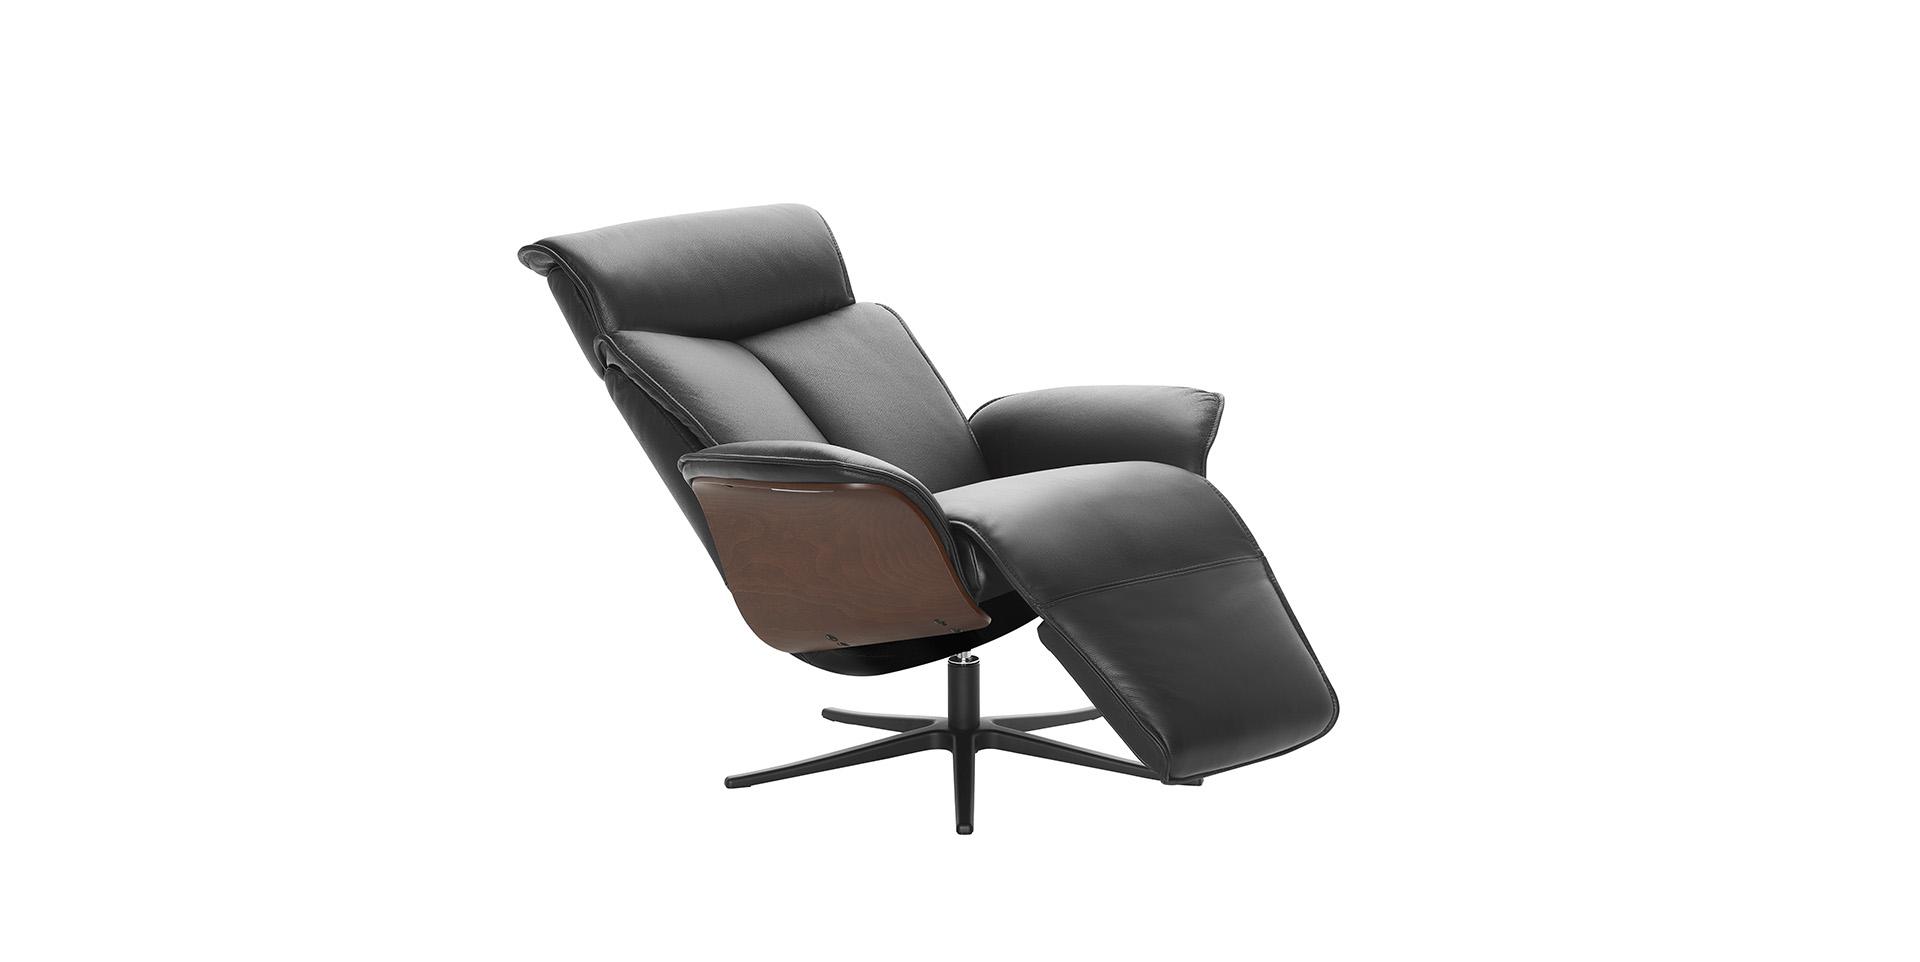 Slider Fauteuil relaxation SOLVEIG 5500 (image 2)